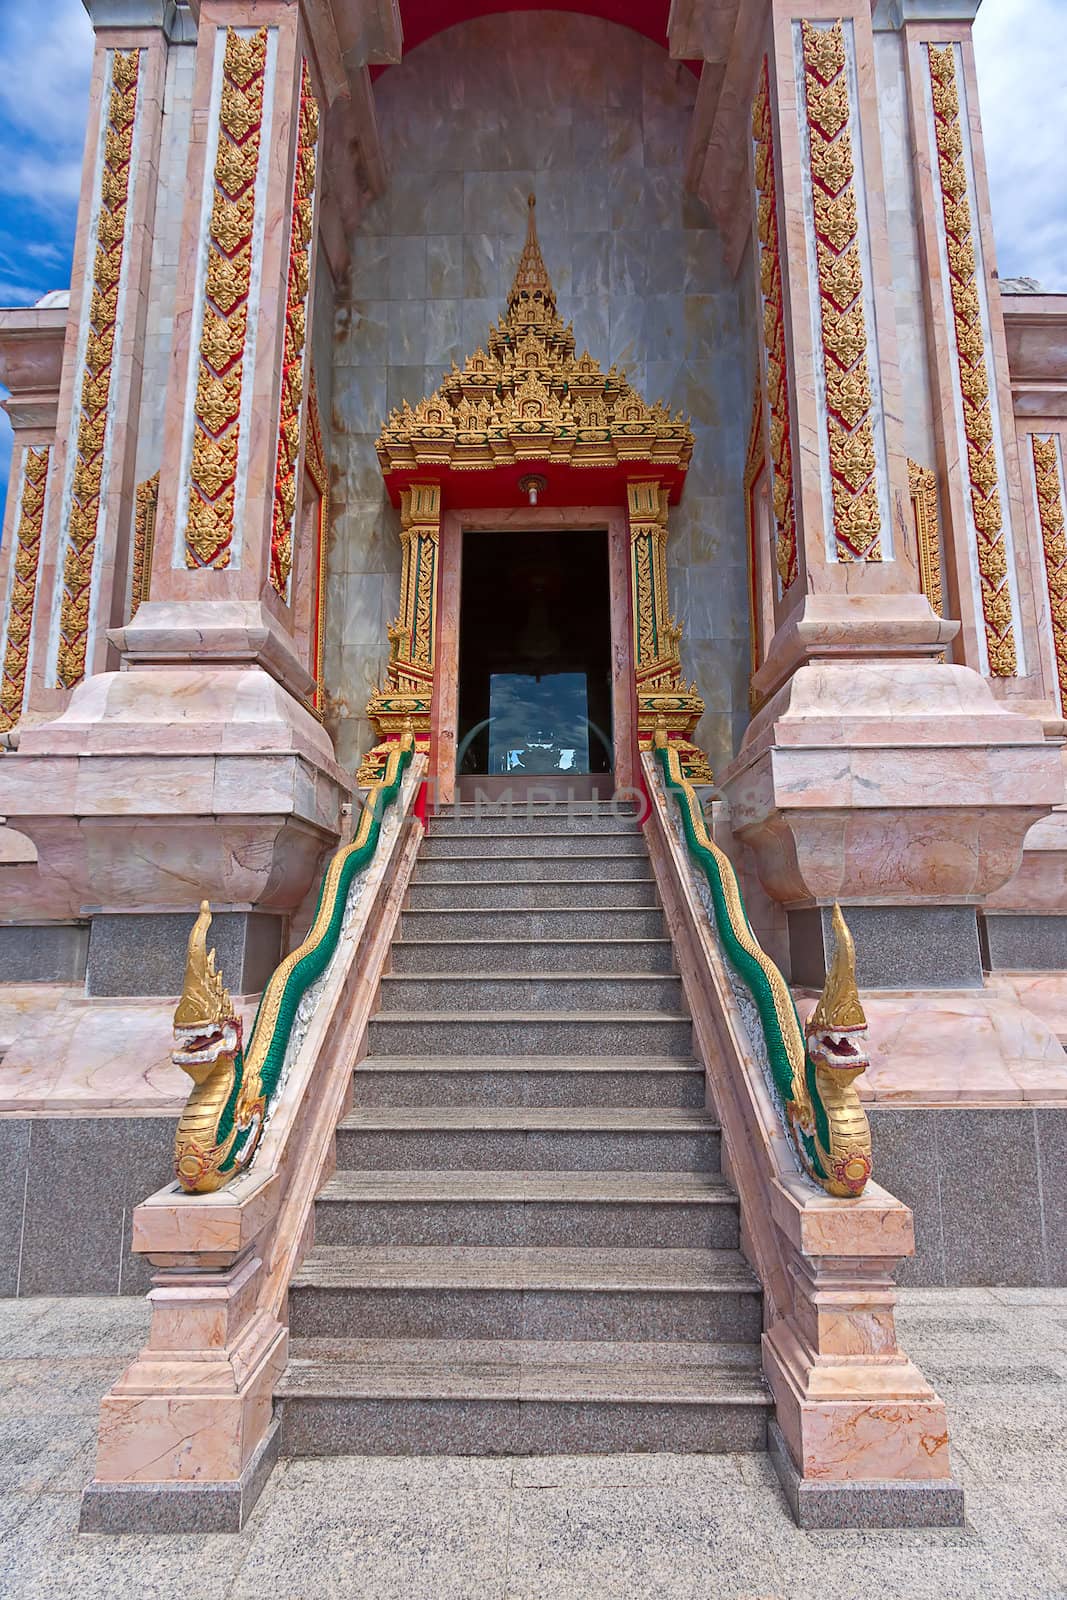 Granite staircase and entrance to  Buddhist temple, Thailand.